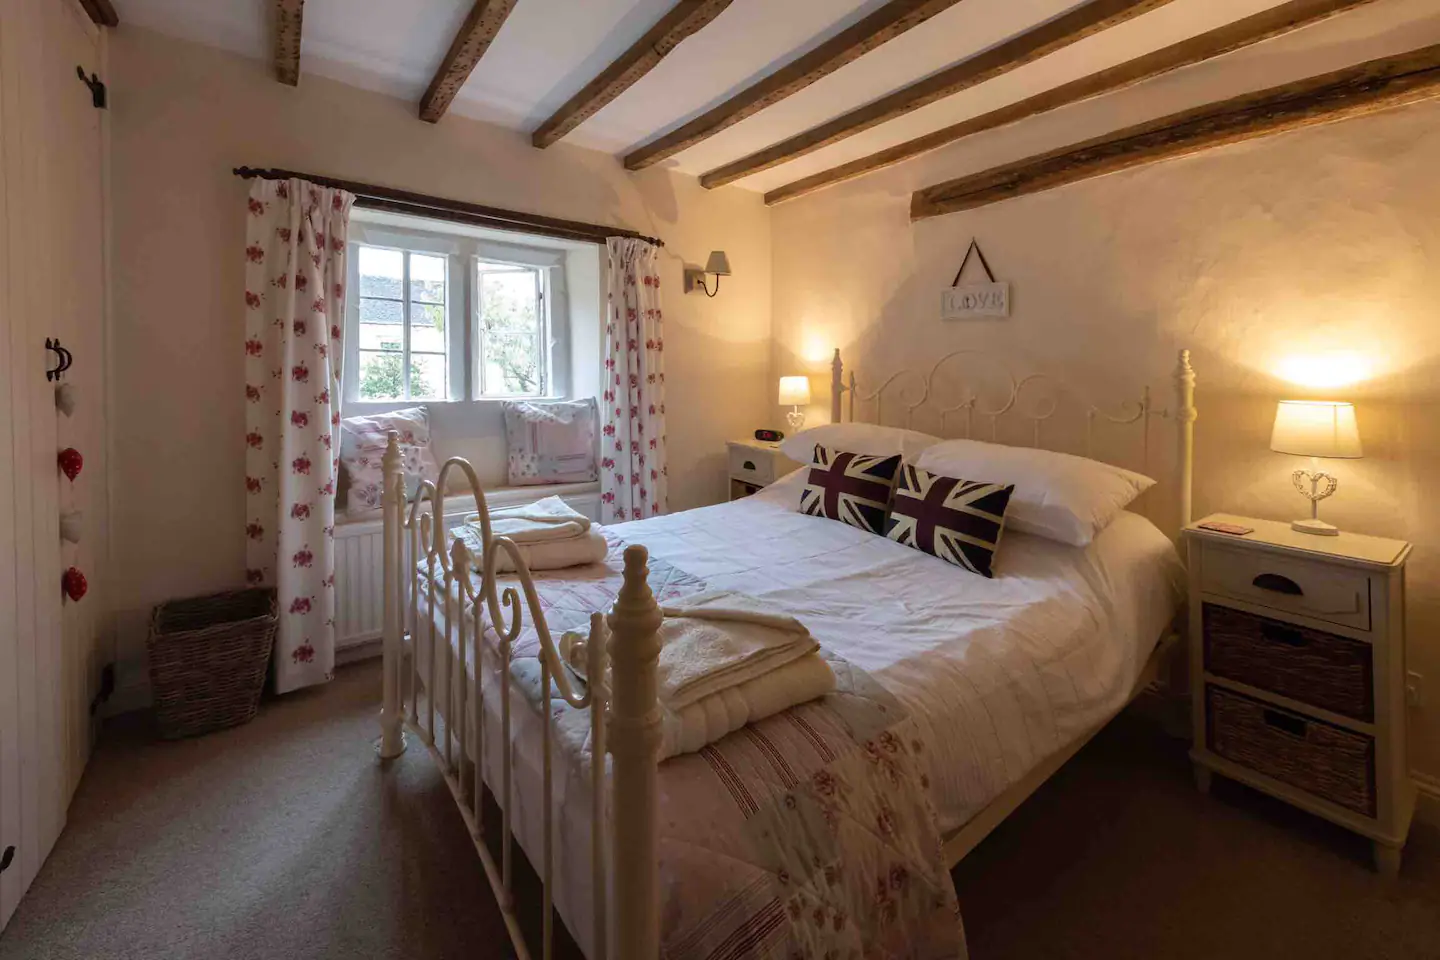 Beautiful double bed in a beamed chamber with a view of the Grade II listed Mullion window.